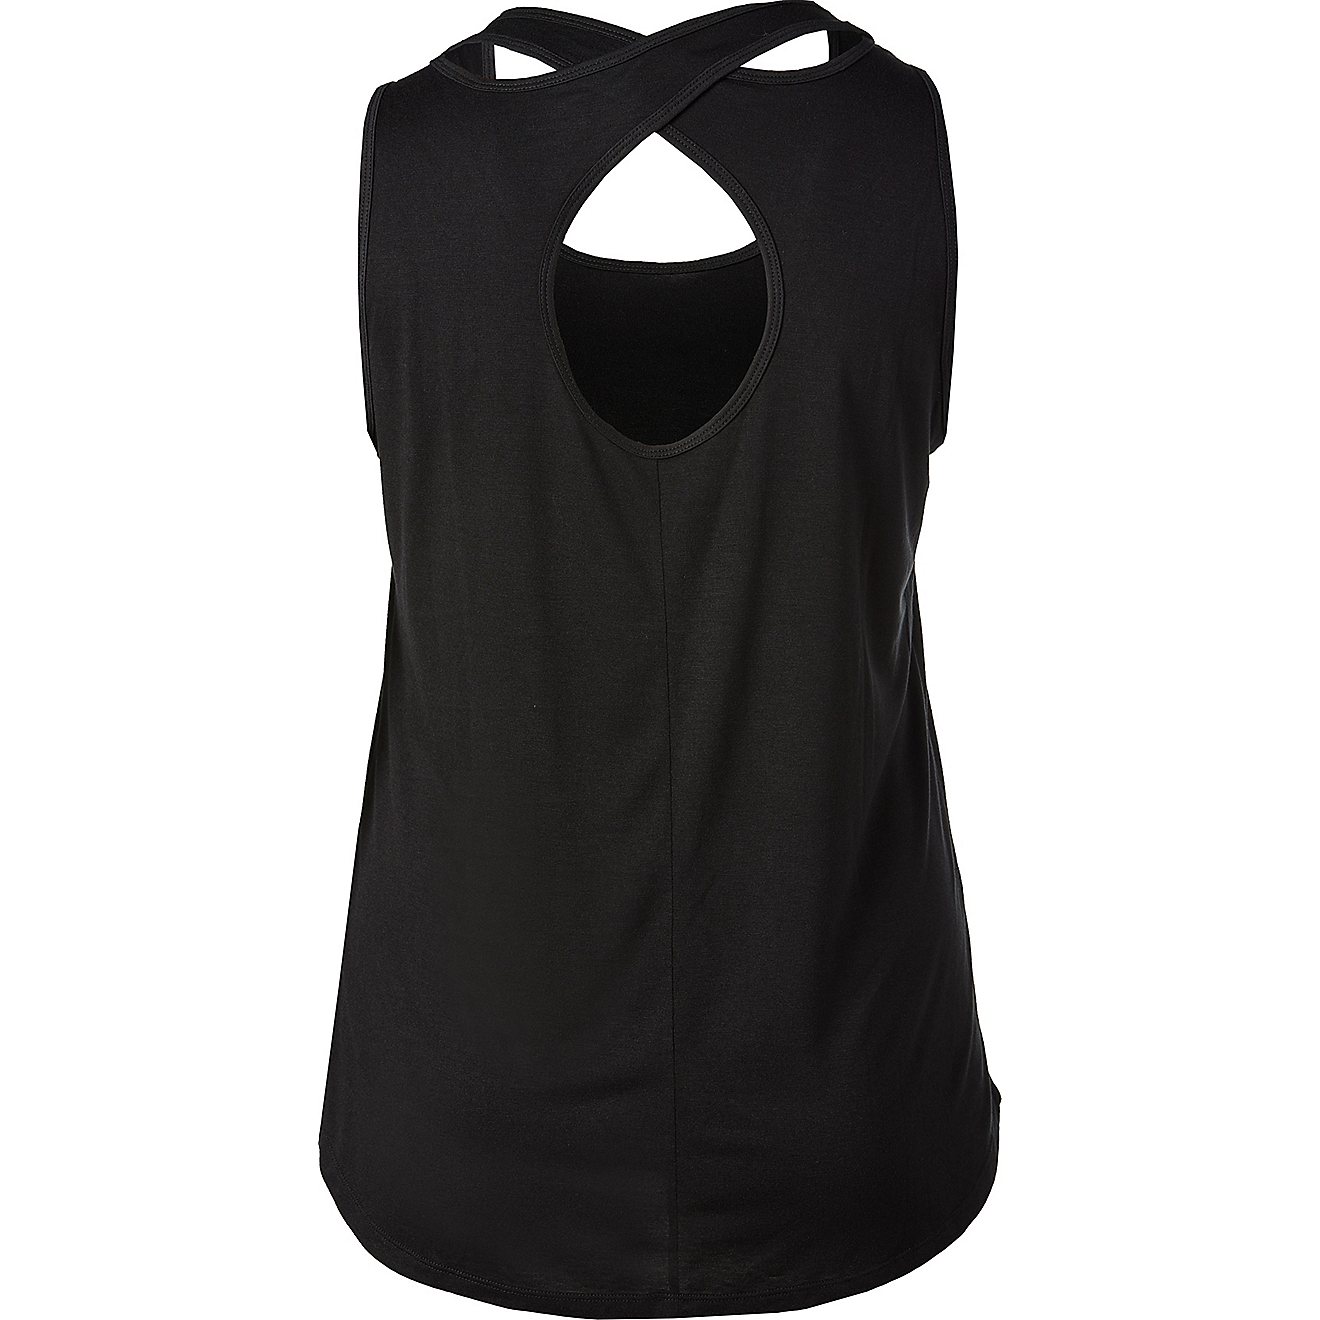 BCG Women's Athletic Infinity Studio Plus Size Tank Top                                                                          - view number 2